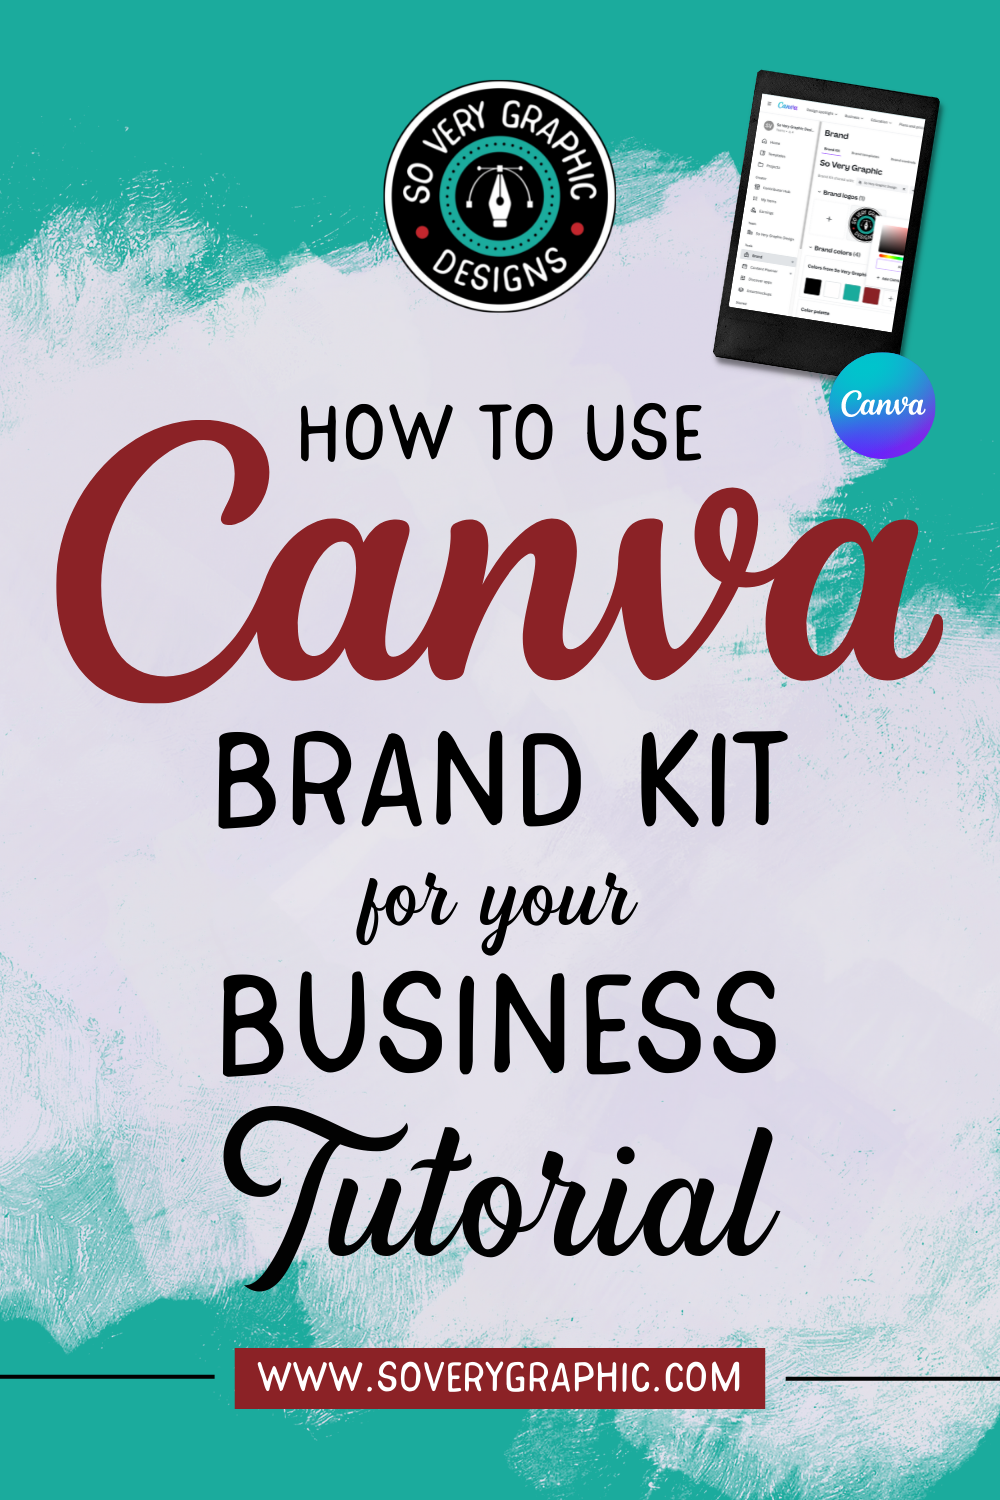 How to Use Canva Brand Kit For Your Business Quick Tutorial